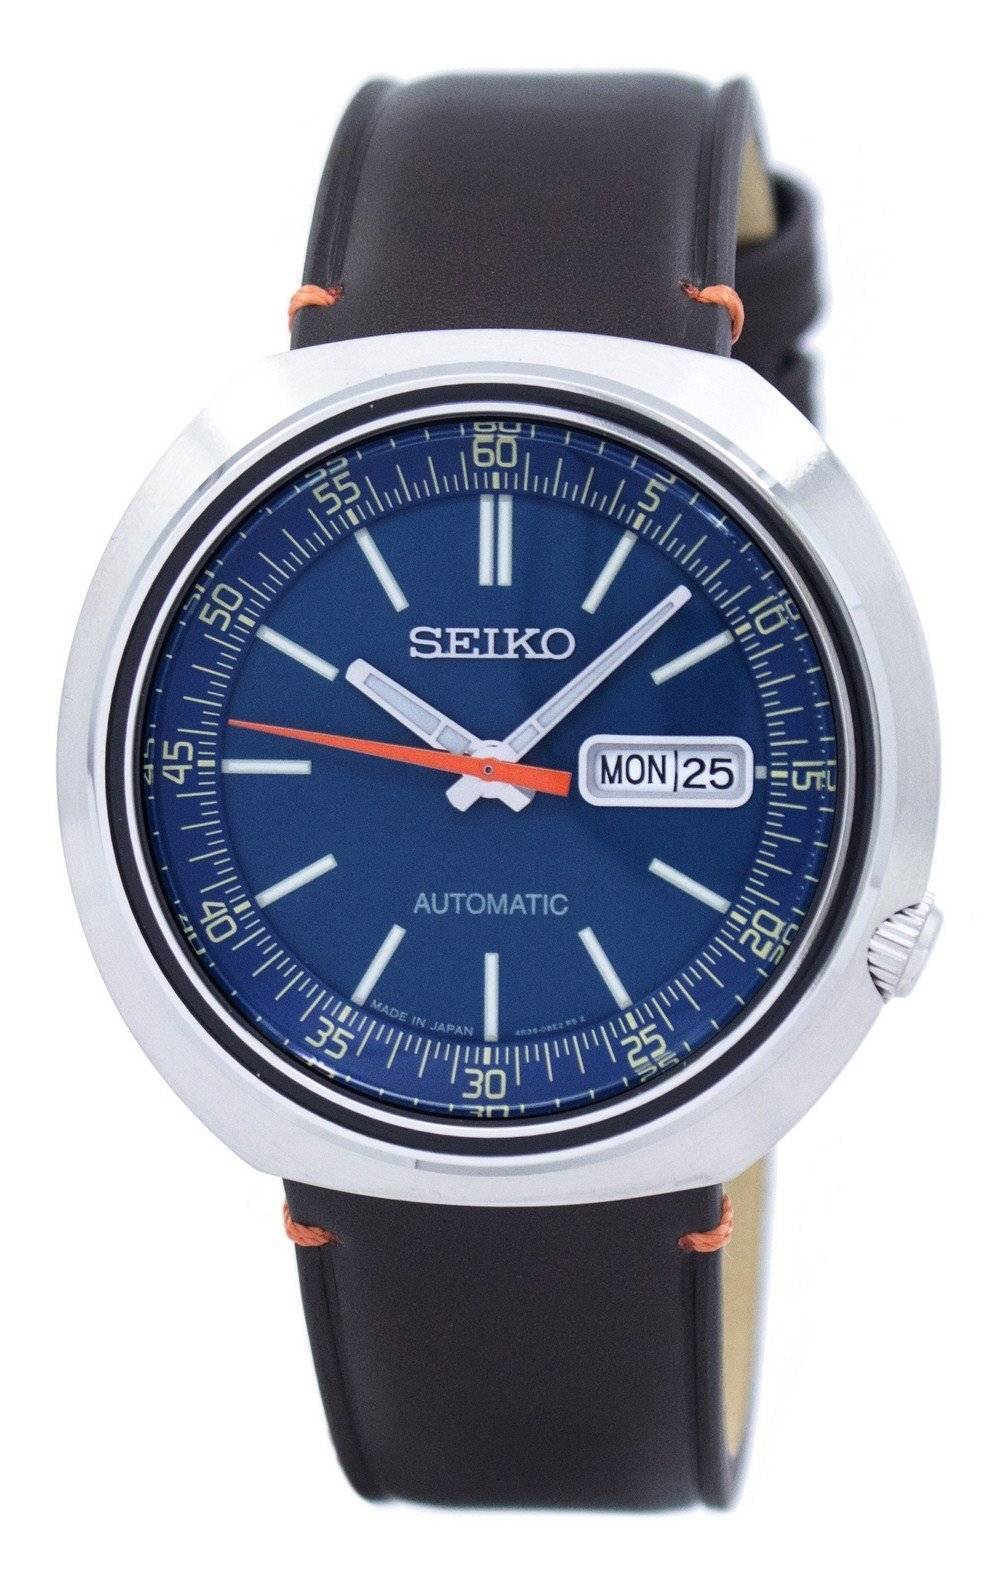 Seiko Recraft Limited Edition Automatic Japan Made SRPC13 SRPC13J1 SRPC13J  Men's Watch